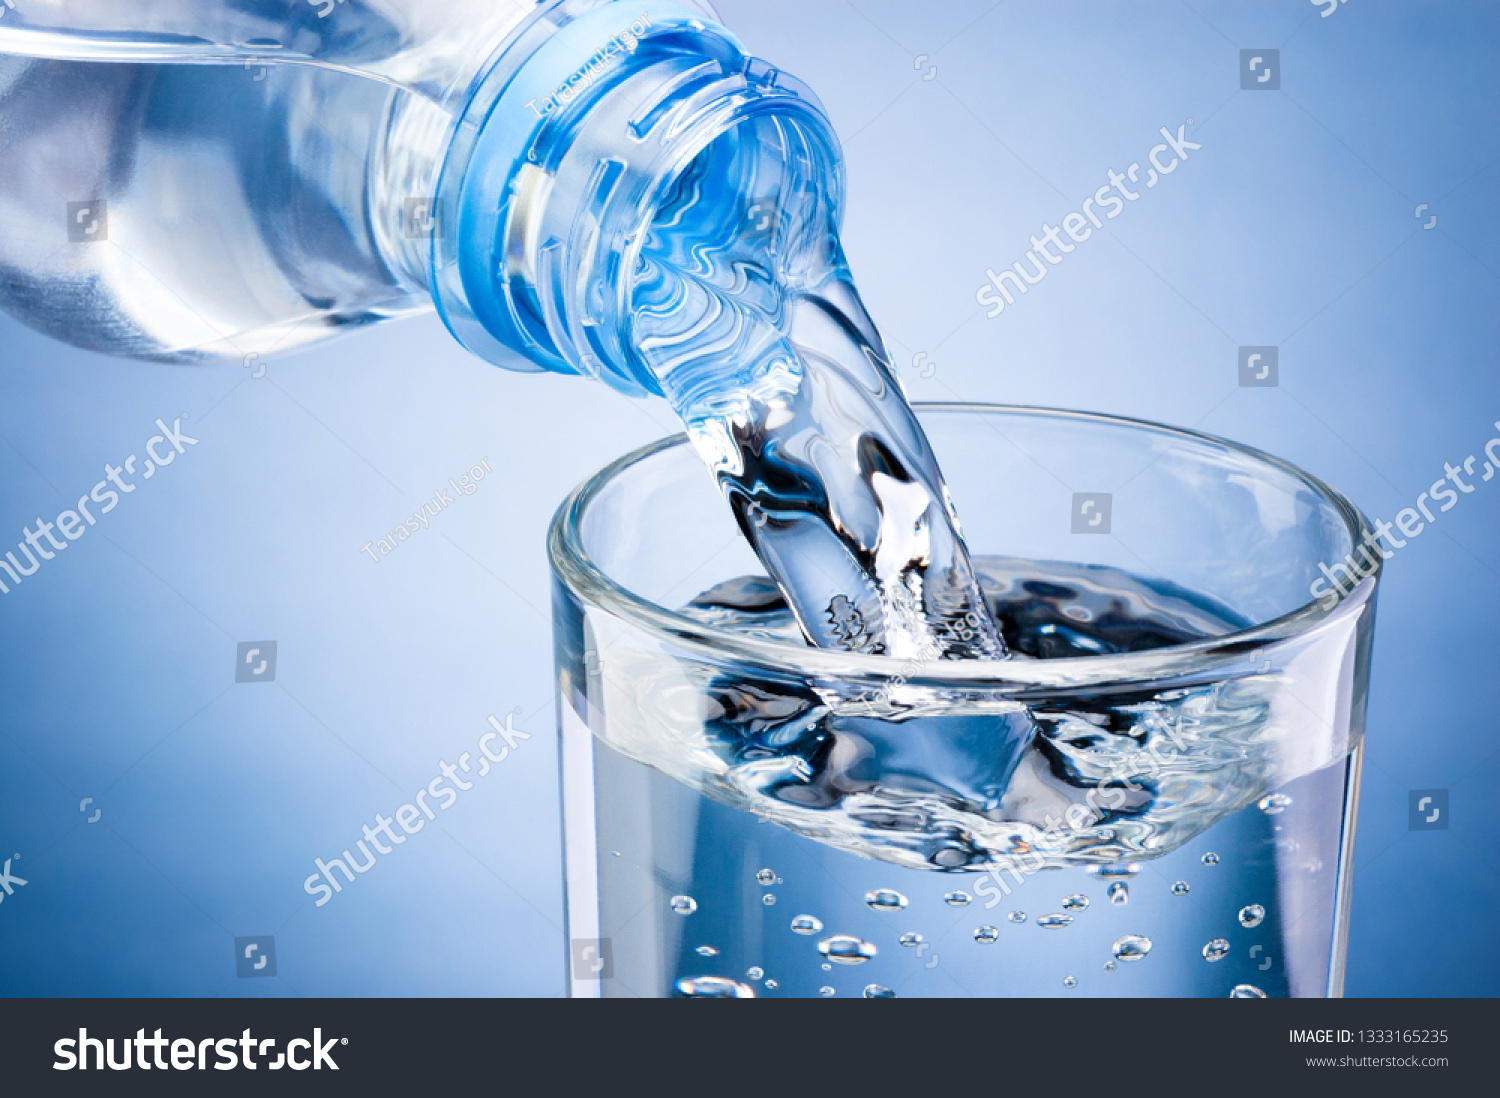 Pouring water from bottle into glass on blue background #1333165235